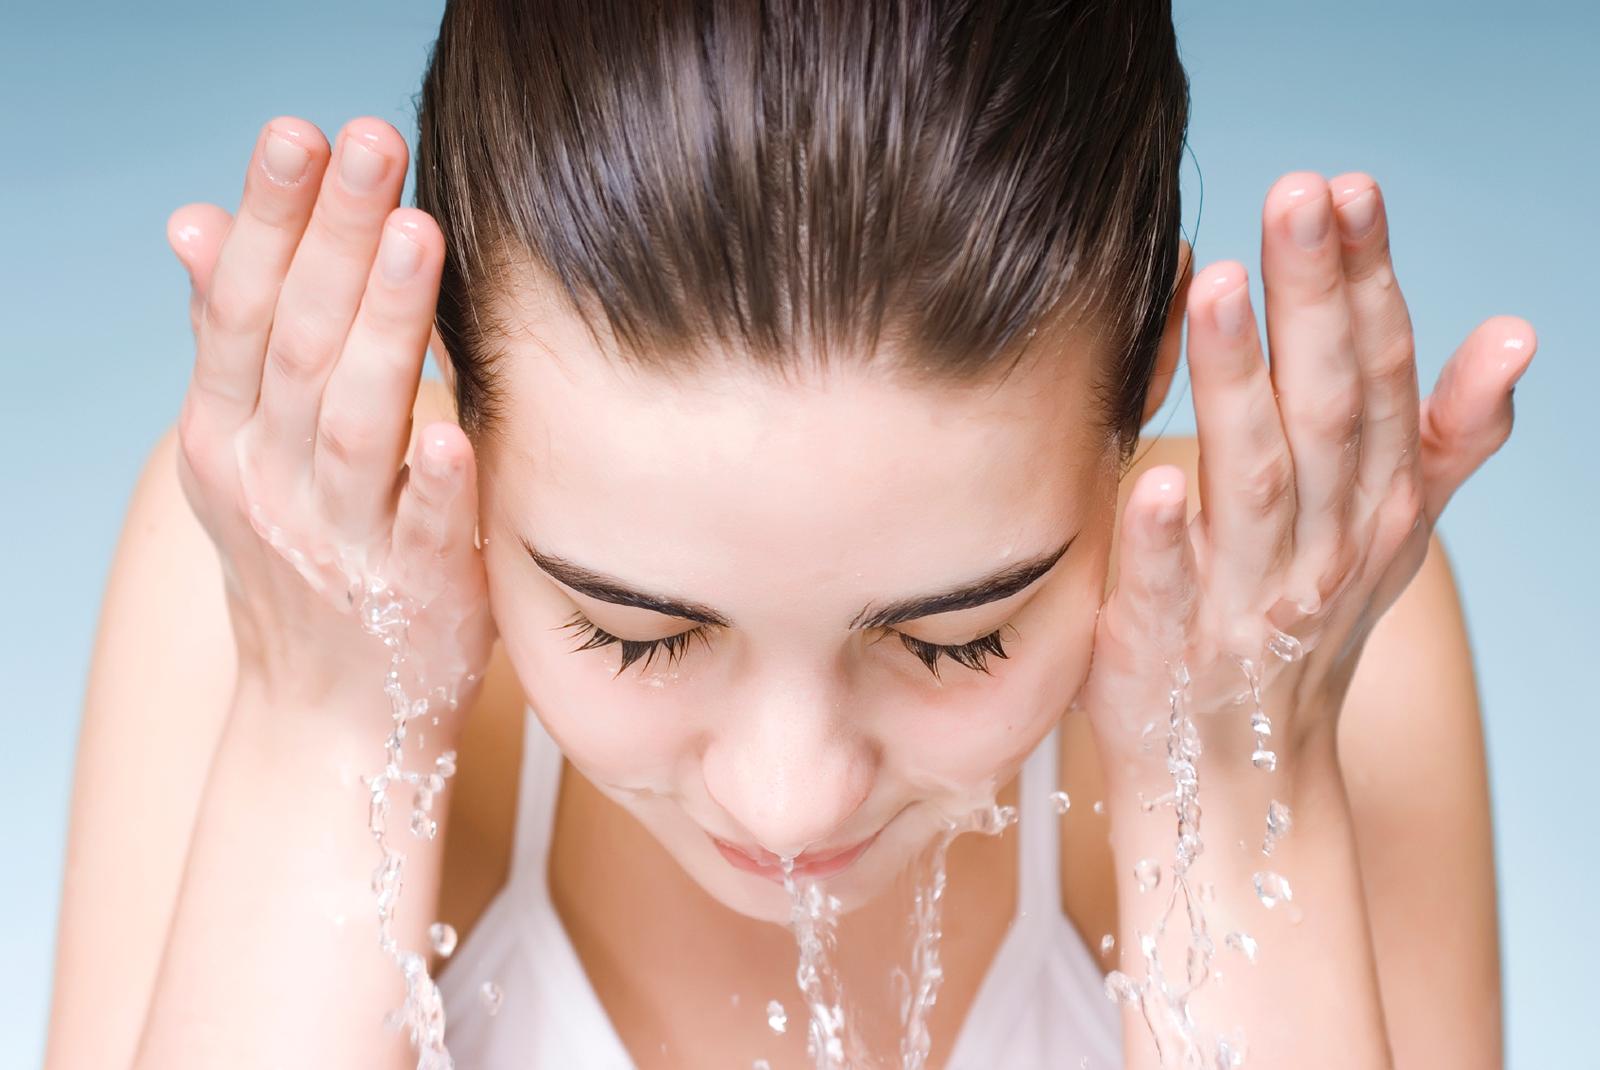 The Do's and Don'ts For Washing Your Face • Relate Magazine